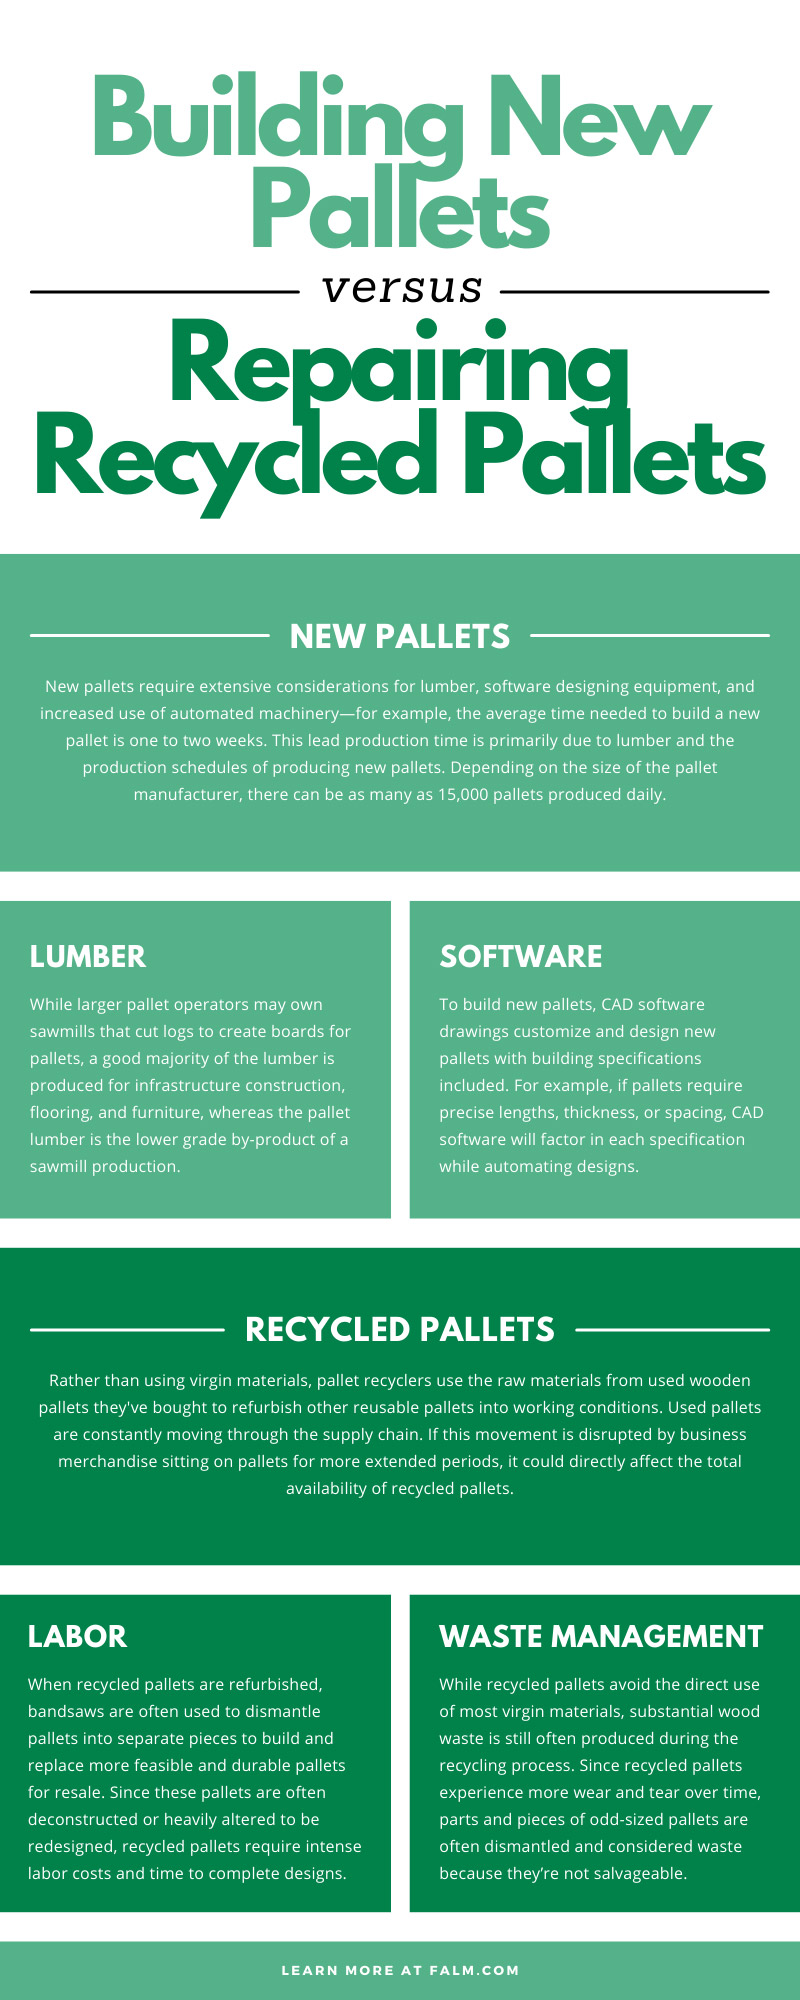 Building New Pallets versus Repairing Recycled Pallets